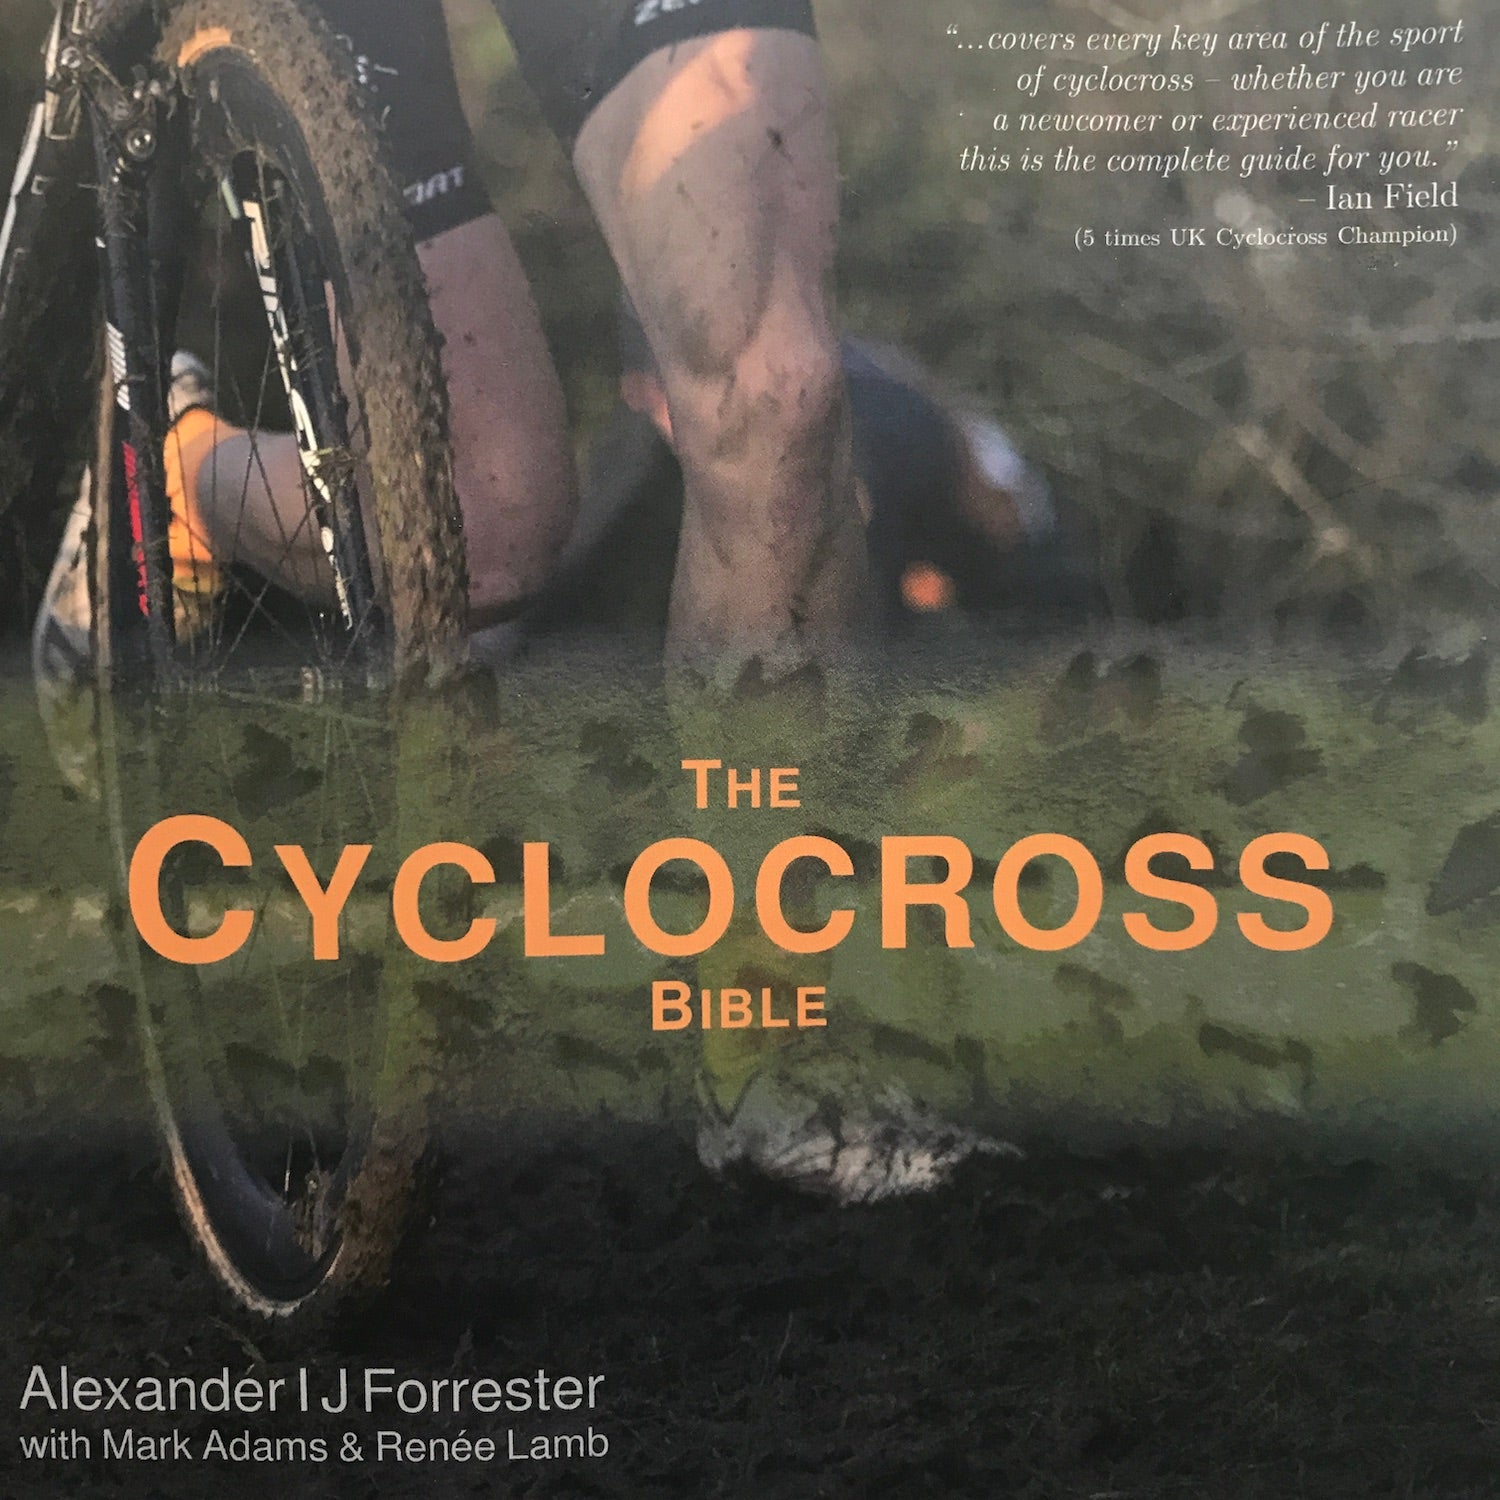 THE CYCLOCROSS BIBLE